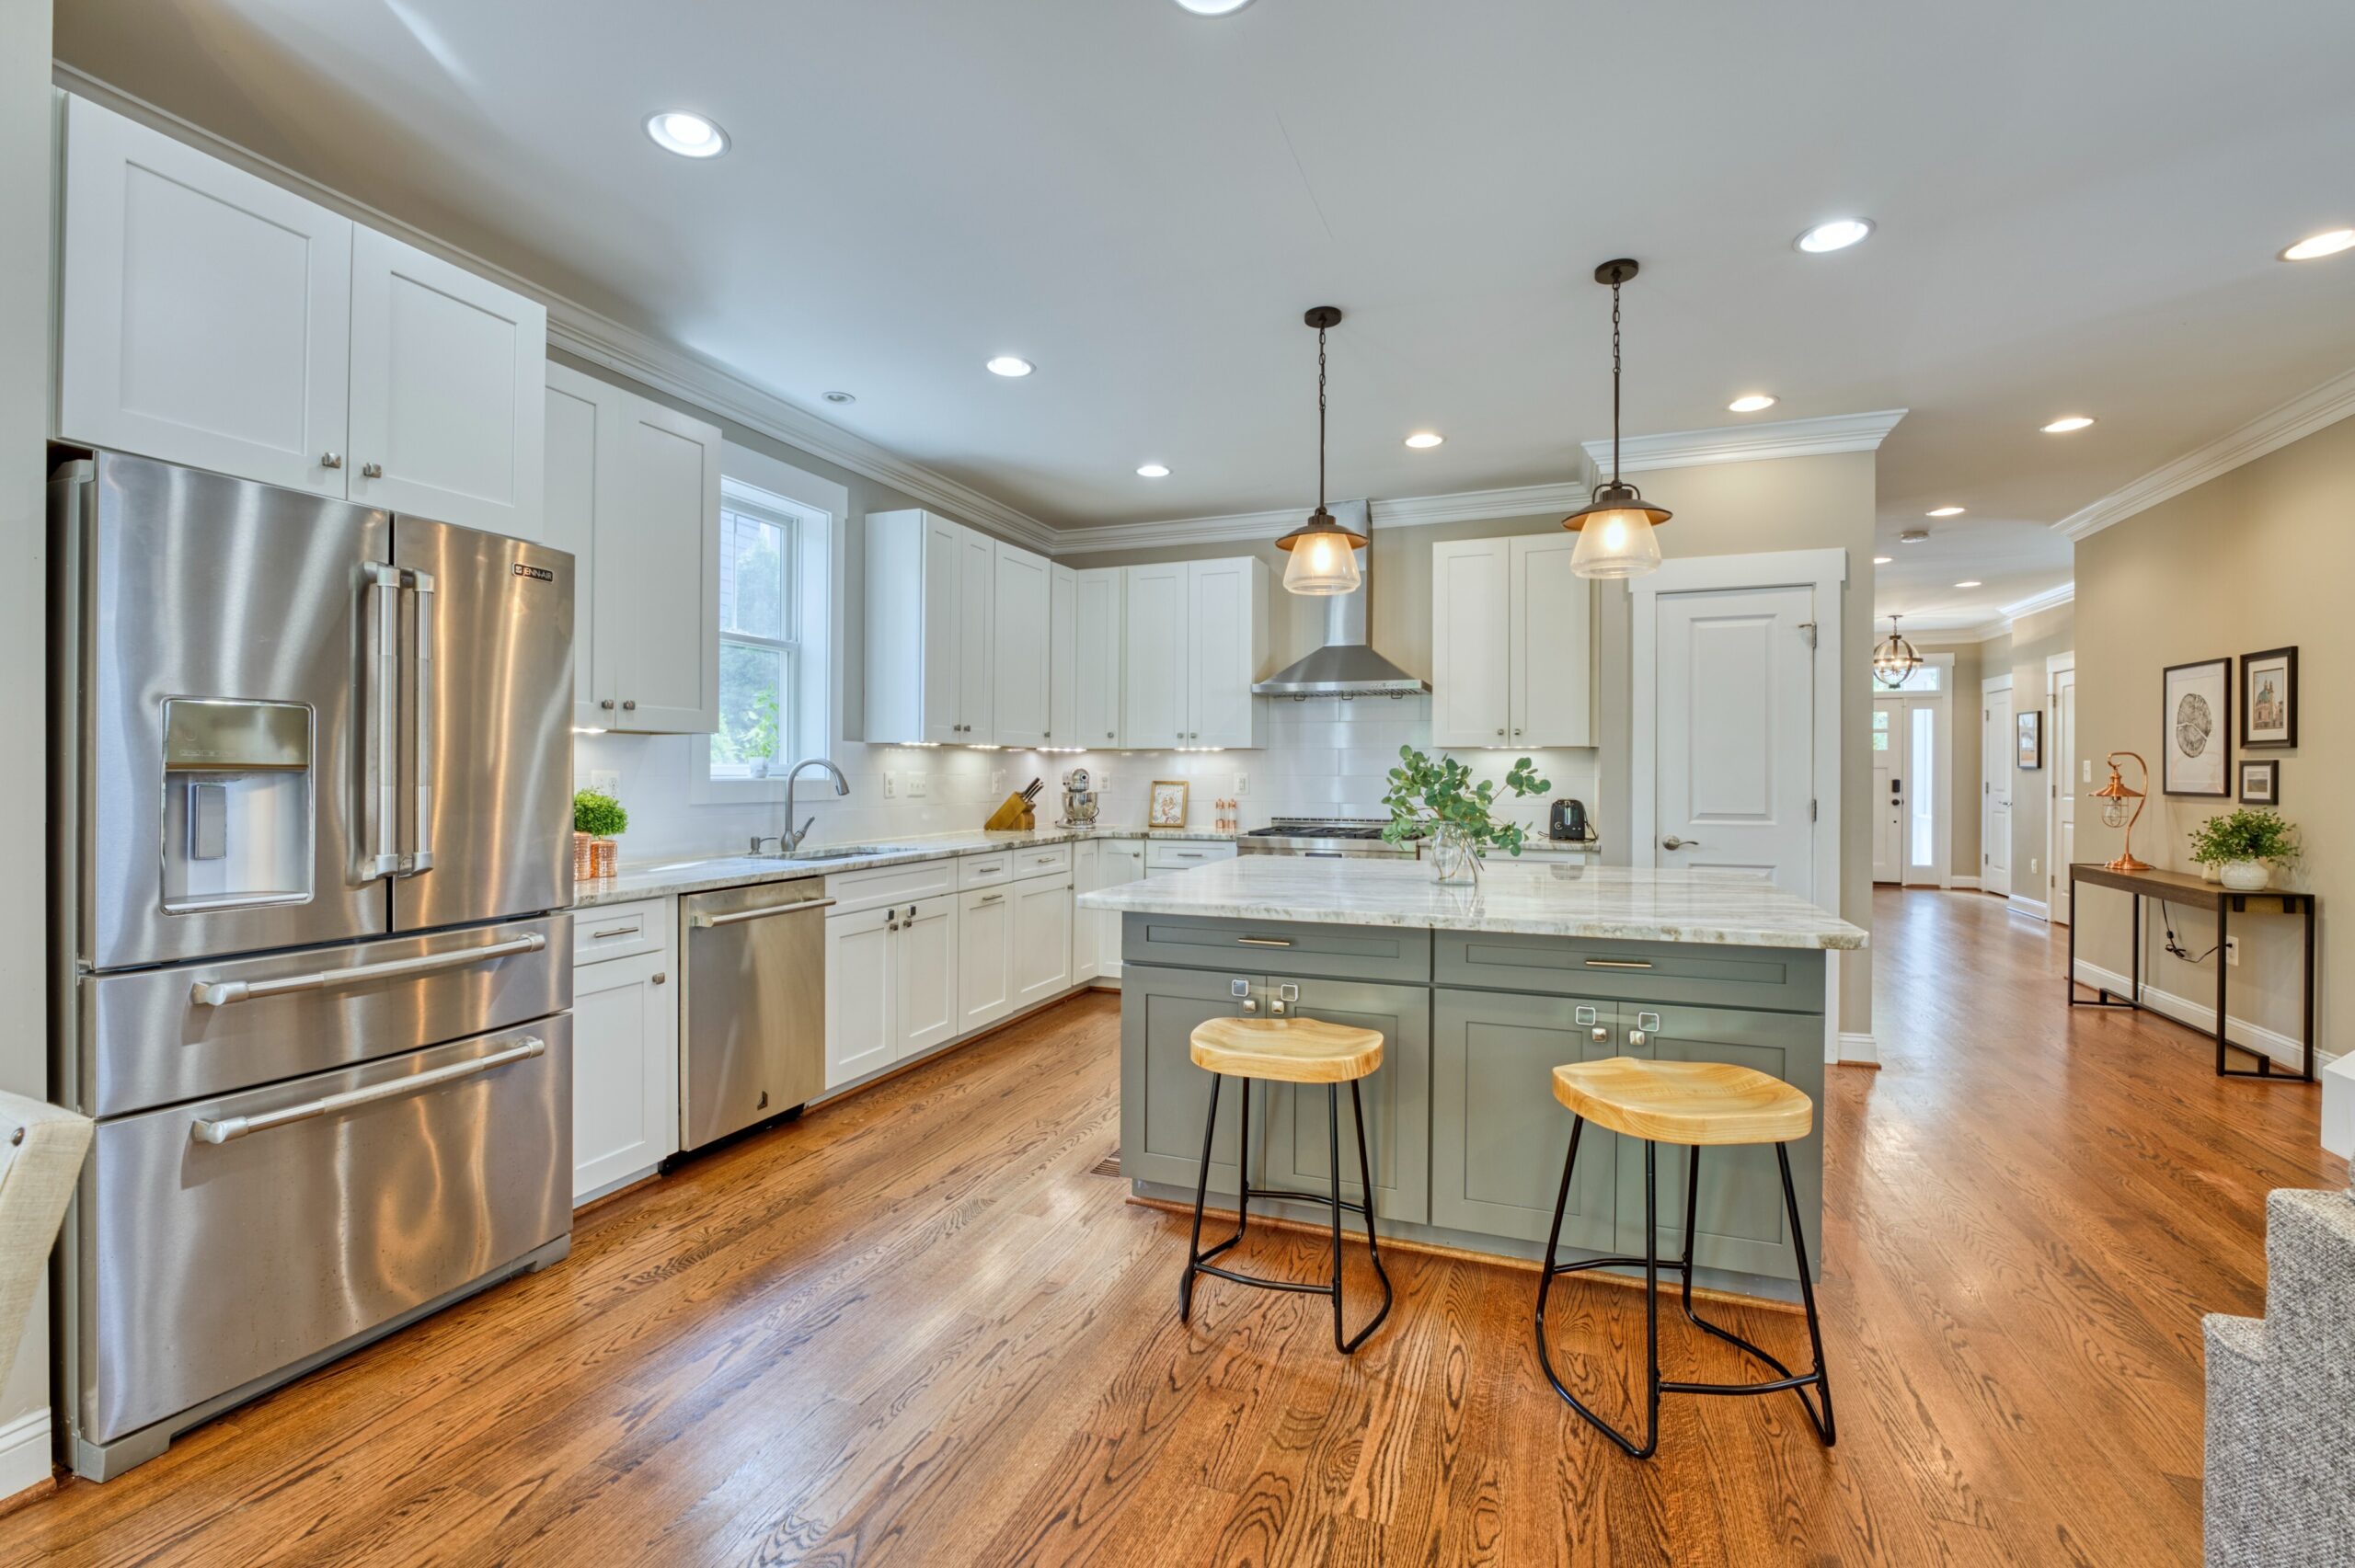 Professional interior photo of 505 N West St - showing the kitchen view from the family room with large island, stools, and quality stainless appliances